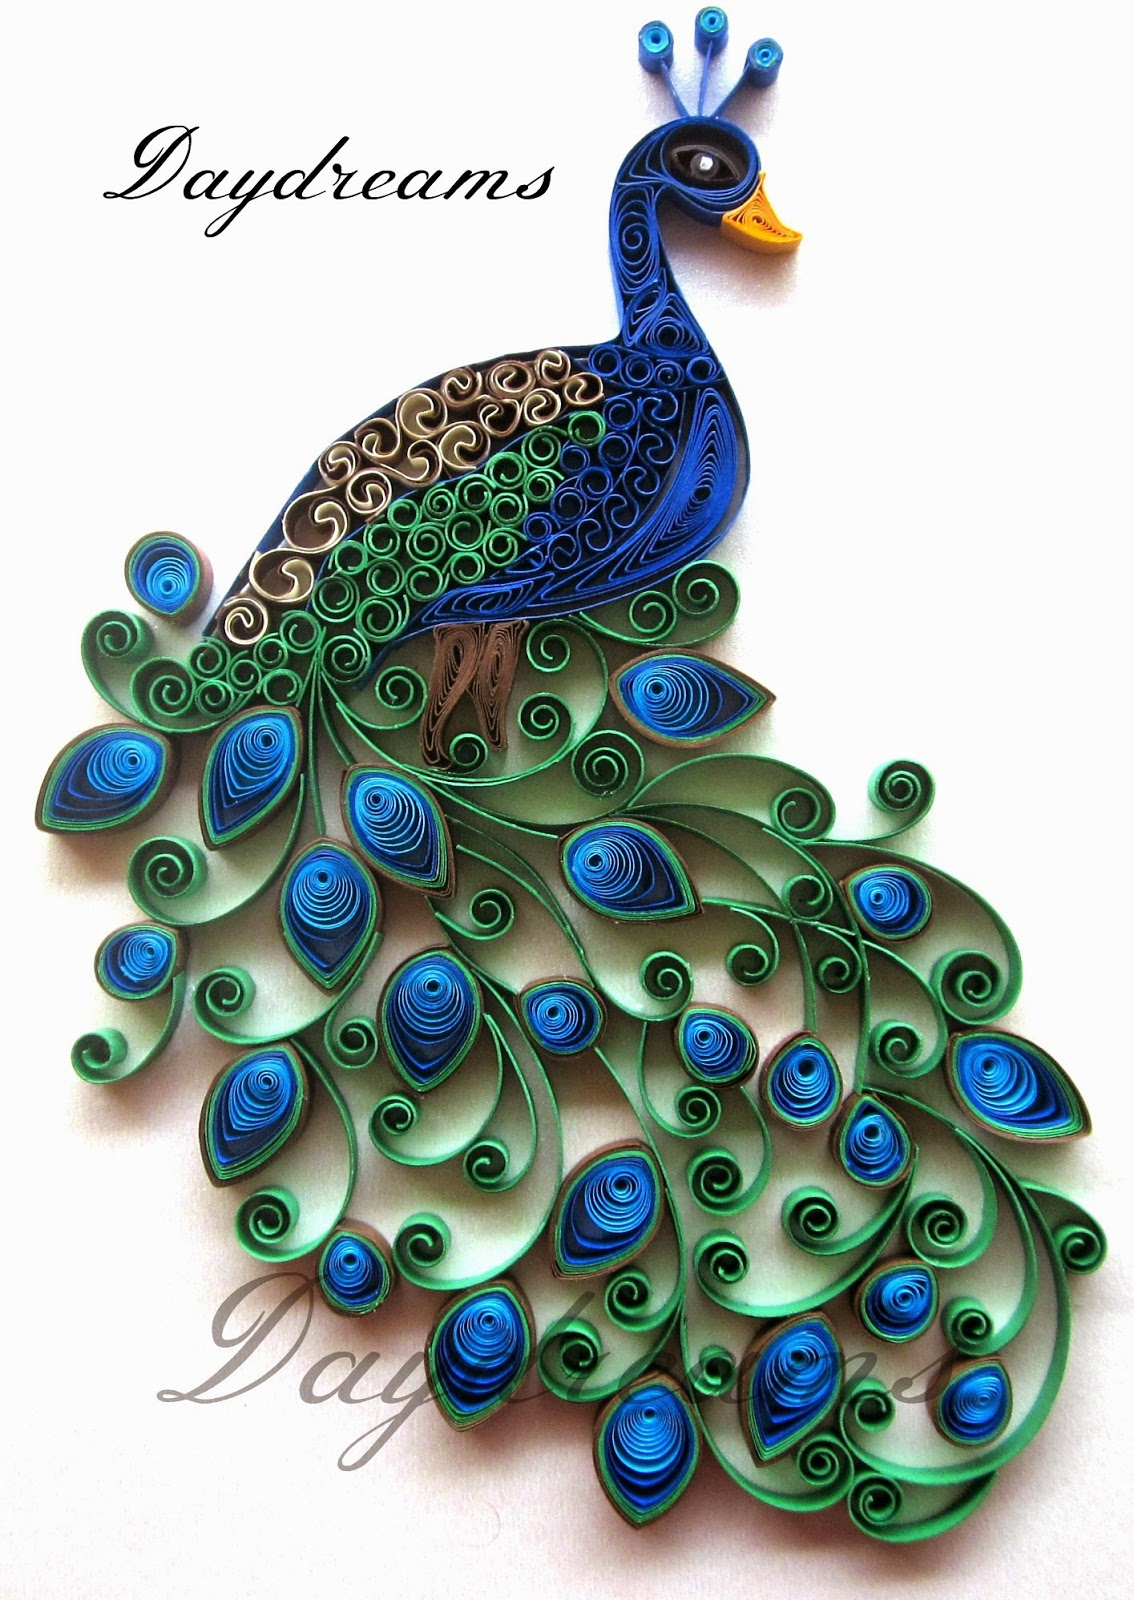 Peacock Embroidery Pattern Daydreams Quilled Peacock Embroidery Design Inspired